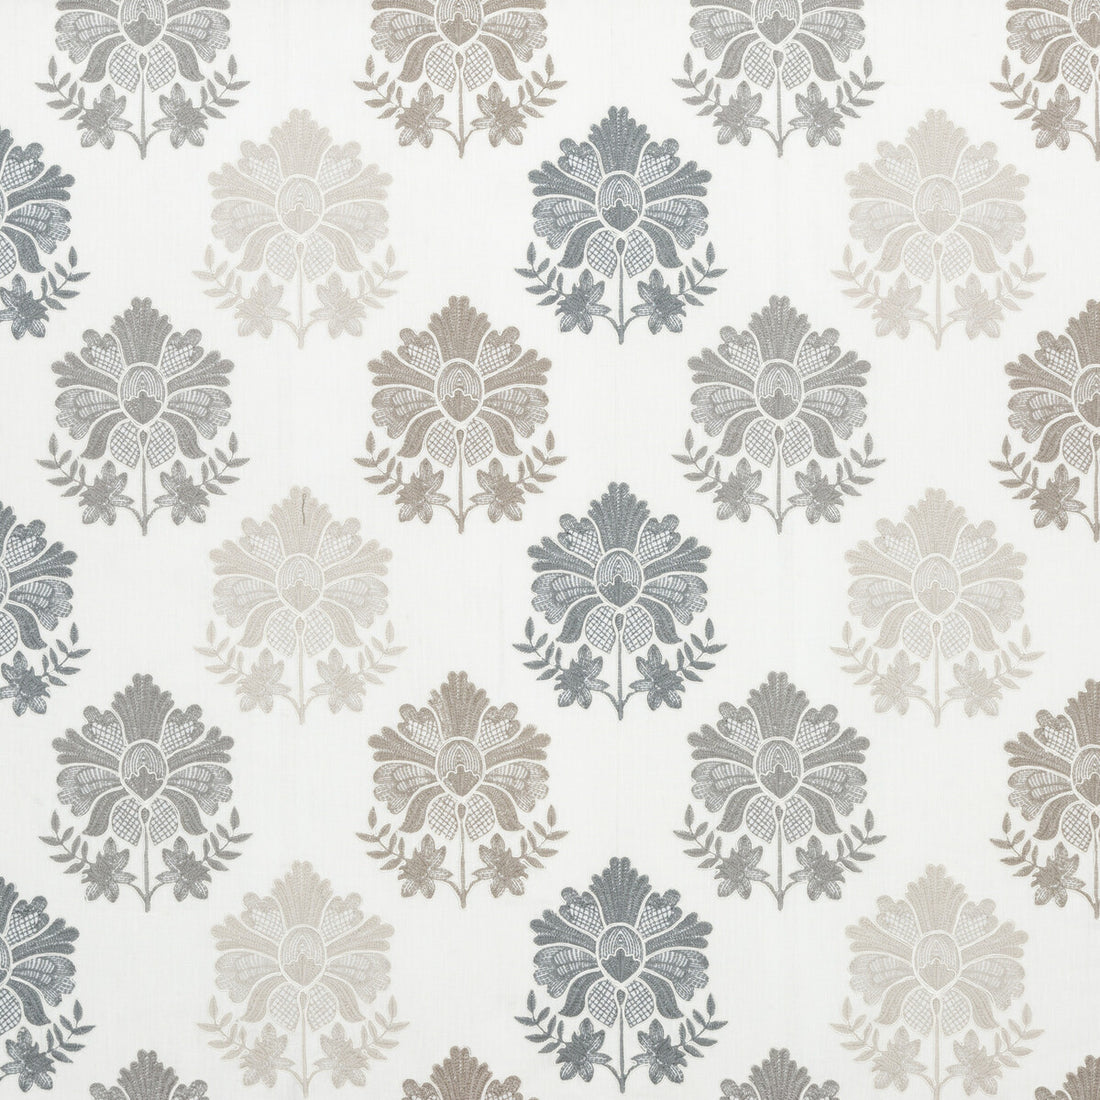 Tregony fabric in mineral color - pattern BF10562.4.0 - by G P &amp; J Baker in the Artisan collection